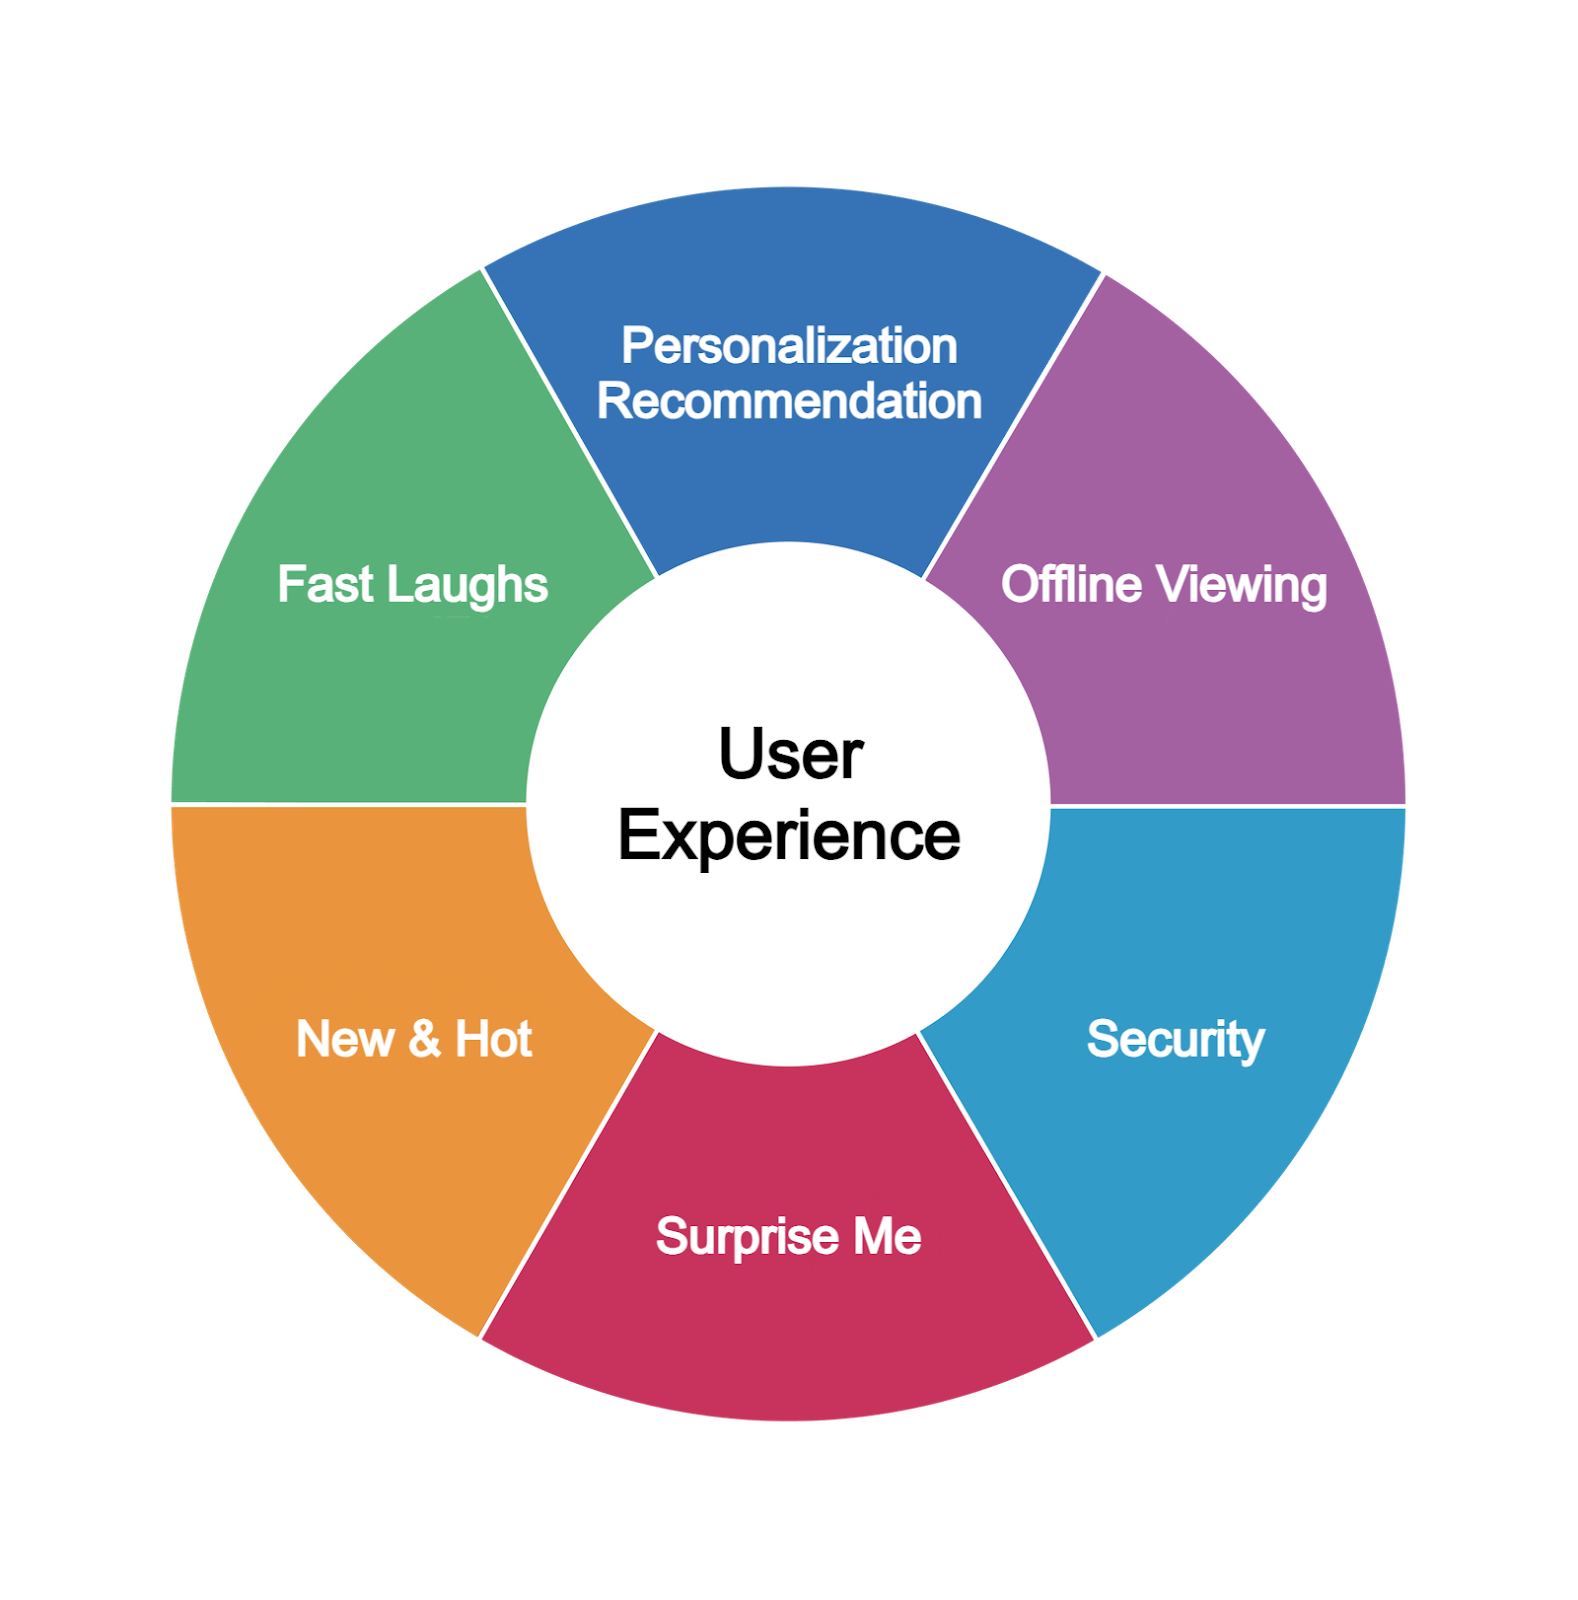 Features That Impact User Experience